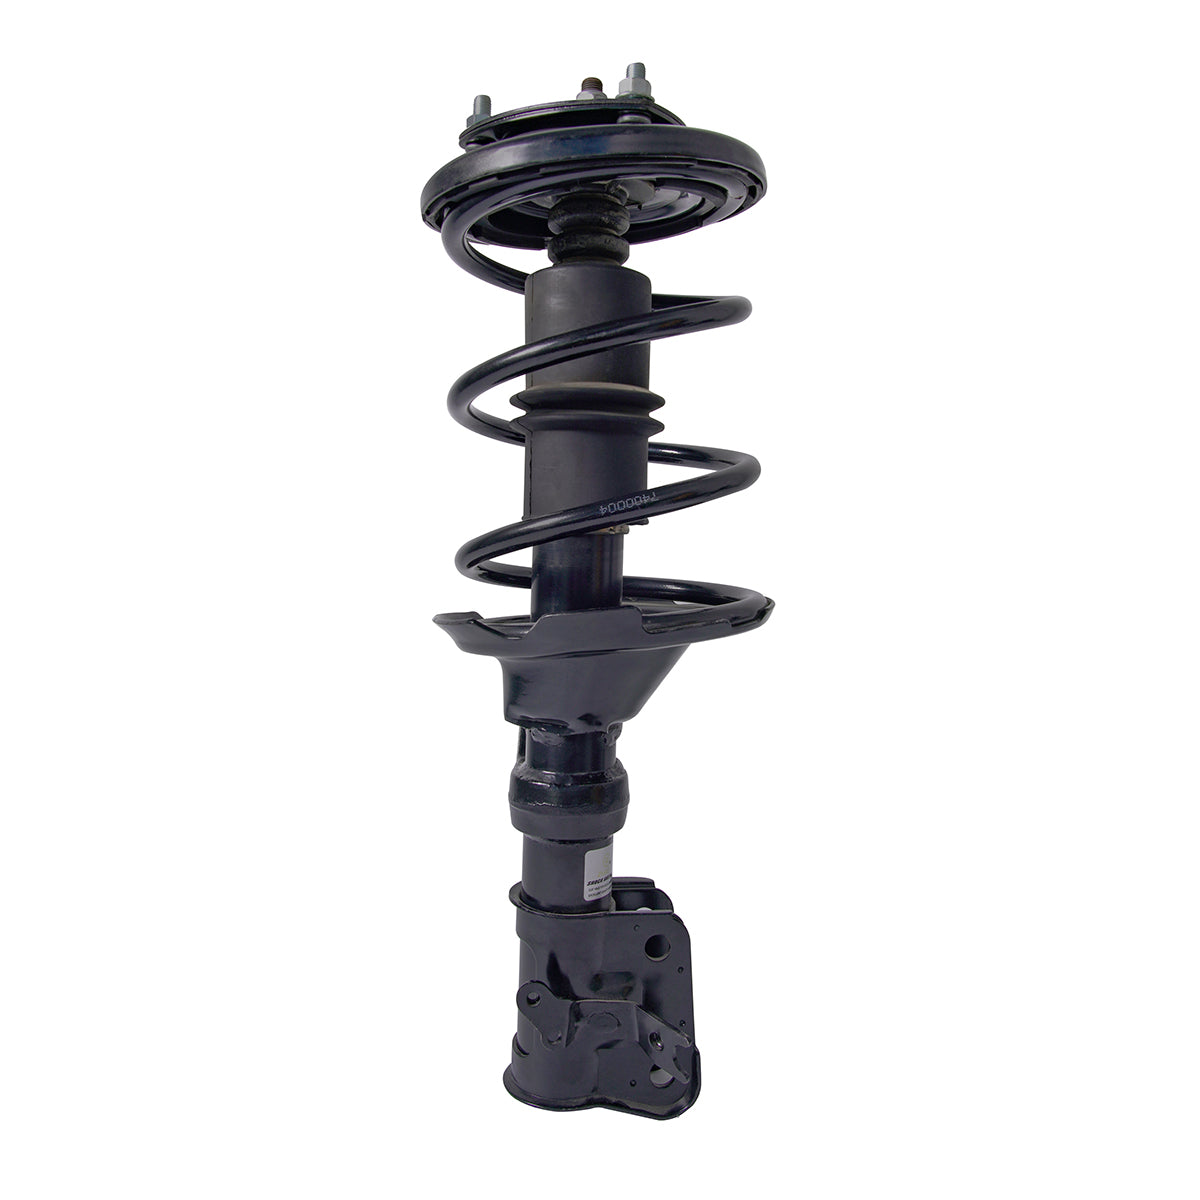 The Loosoo car shock absorber replacement has a more flexible valve system design than the original shock absorber and produces low wear and long life in strict accordance with OEM standards, making the car safer, more comfortable, and more controllable, to offer a stable, and noiseless ride.